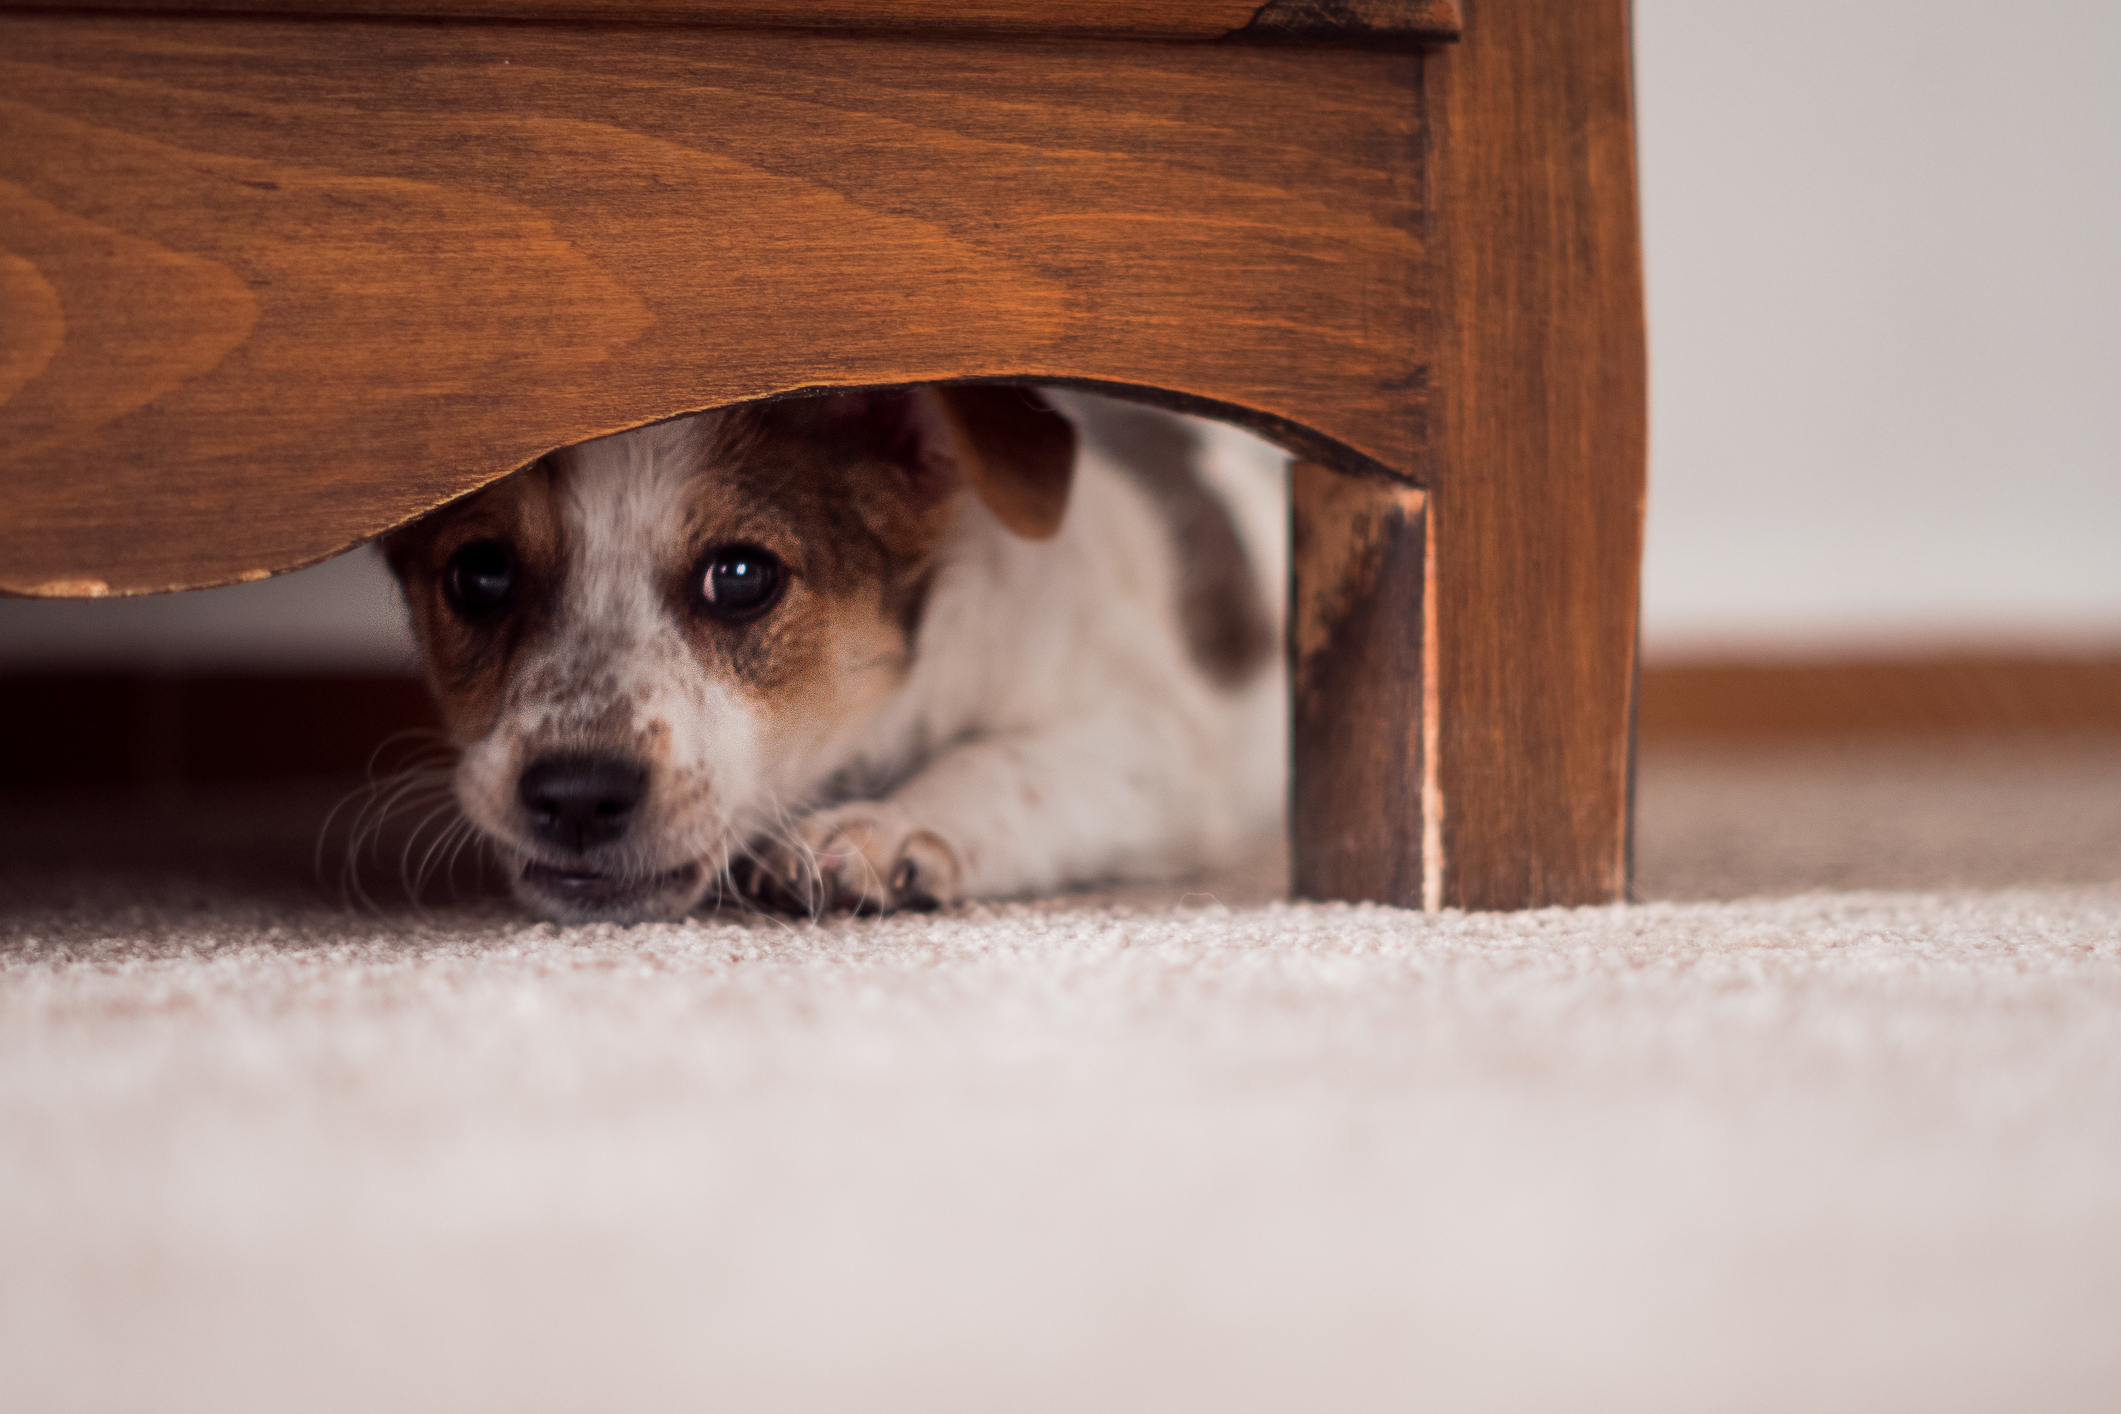 A troubled dog hides under the furniture